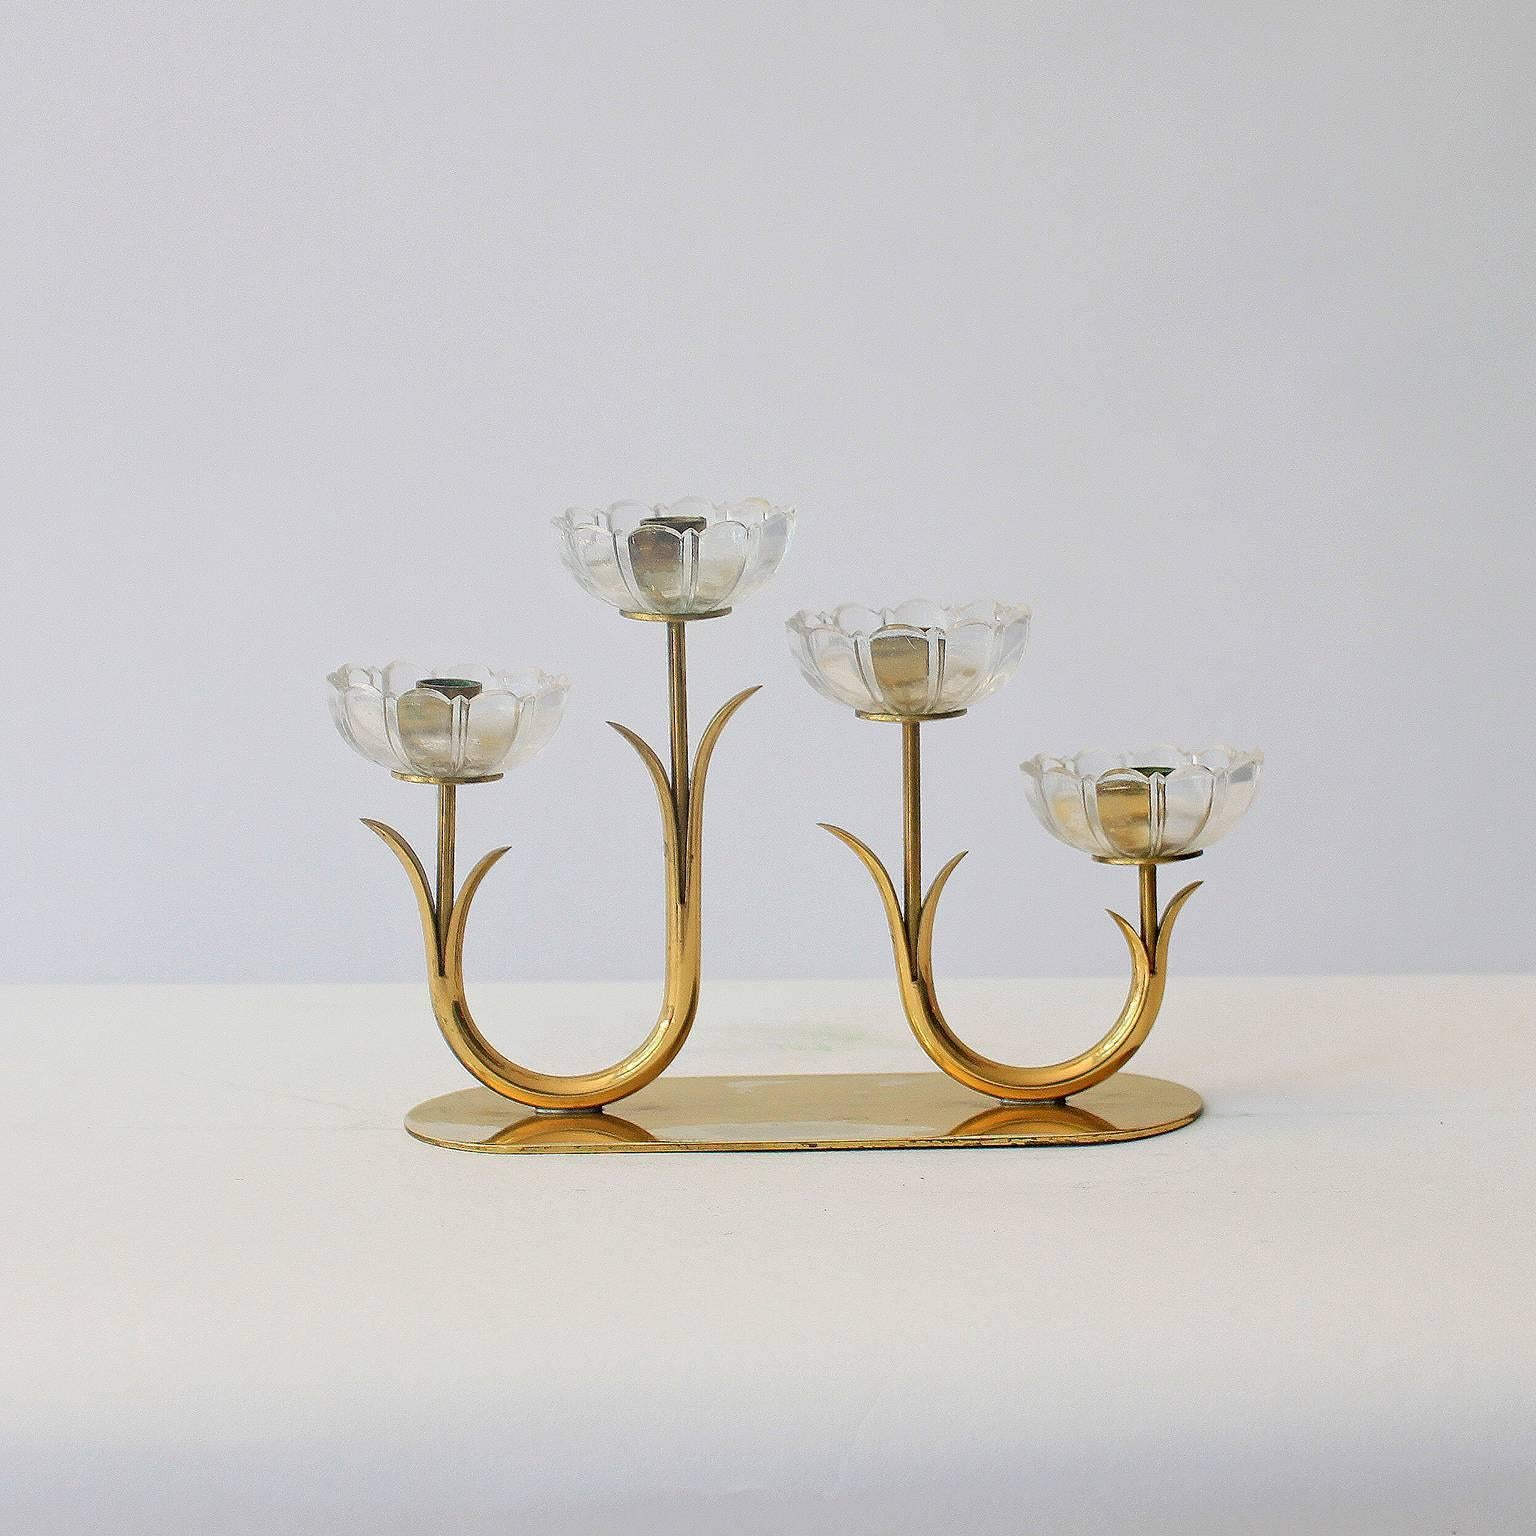 Elegant Gunnar Ander Flower Candleholder In Good Condition For Sale In Brussels, BE